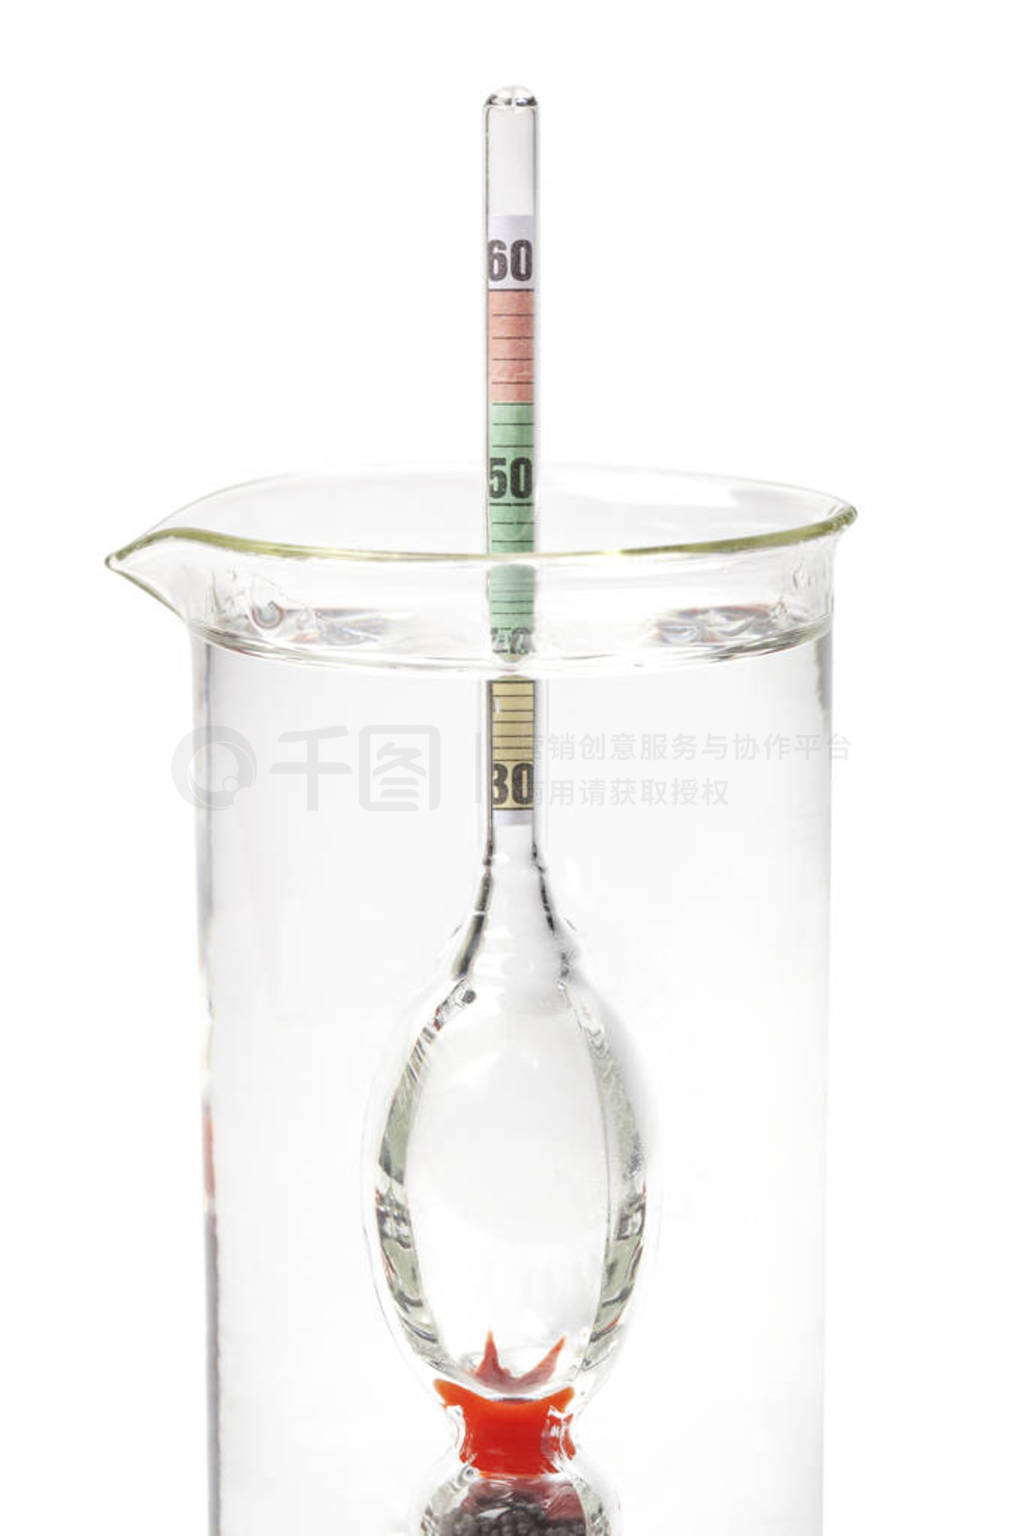 Alcohol Meter Hydrometer in a Laboratory Test Flask on White.